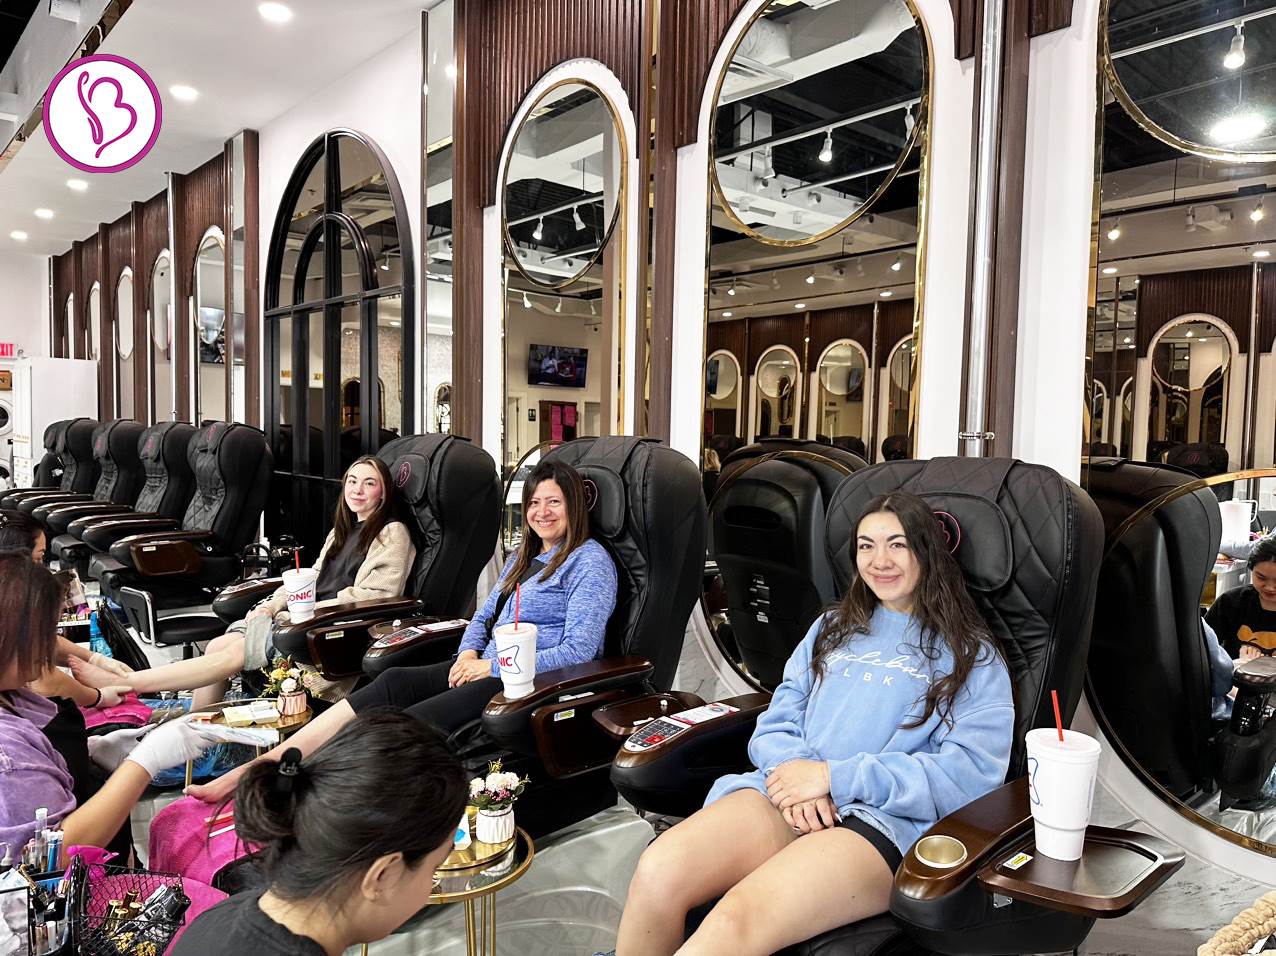 Say Goodbye to Toxins: Your Guide to Non-Toxic Nail Salons in Lubbock